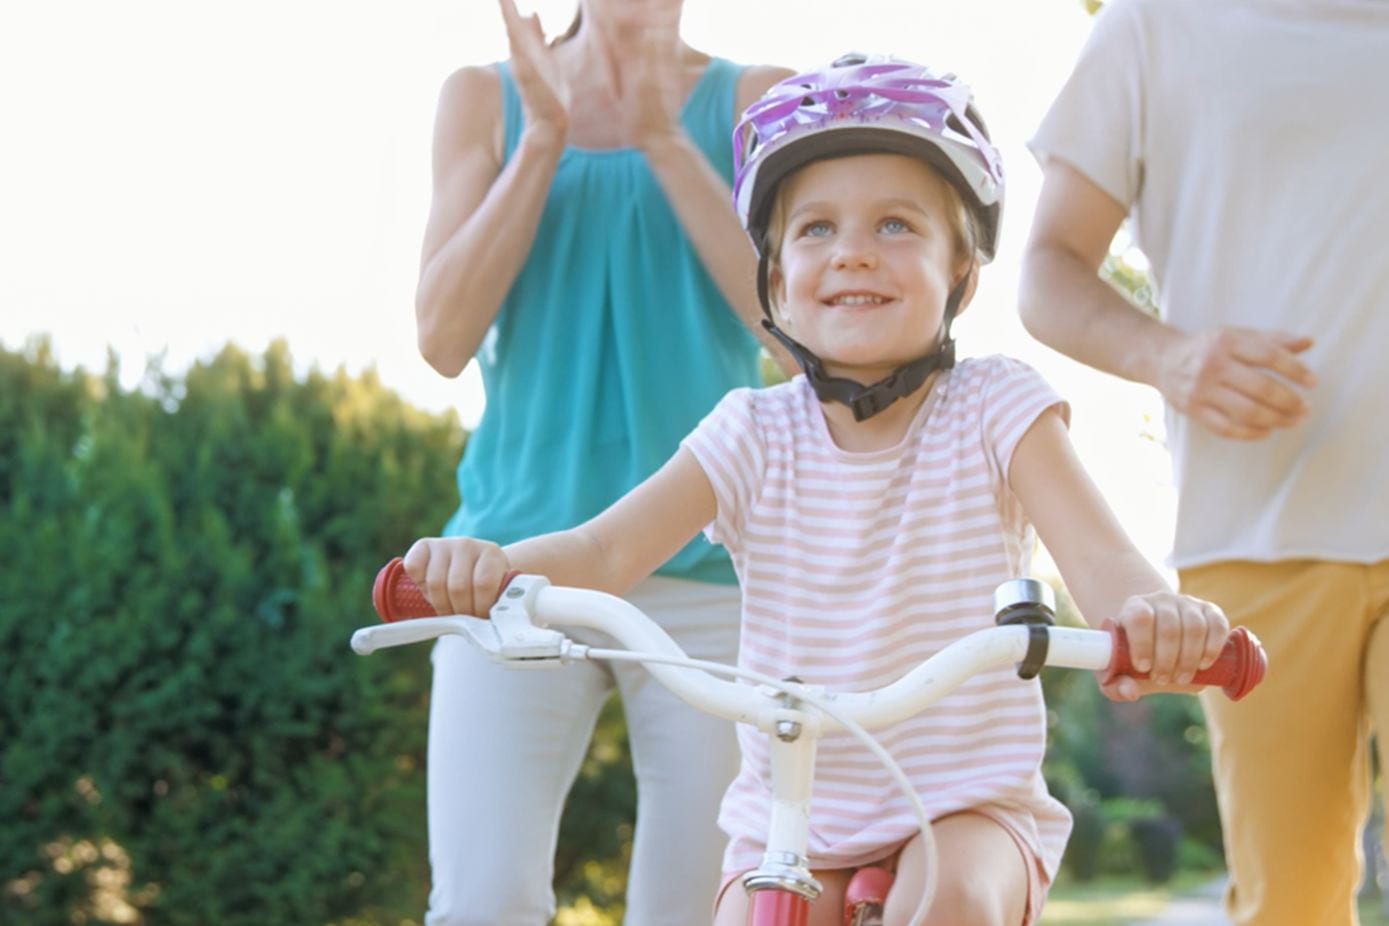 Girl riding her bike with parents helping